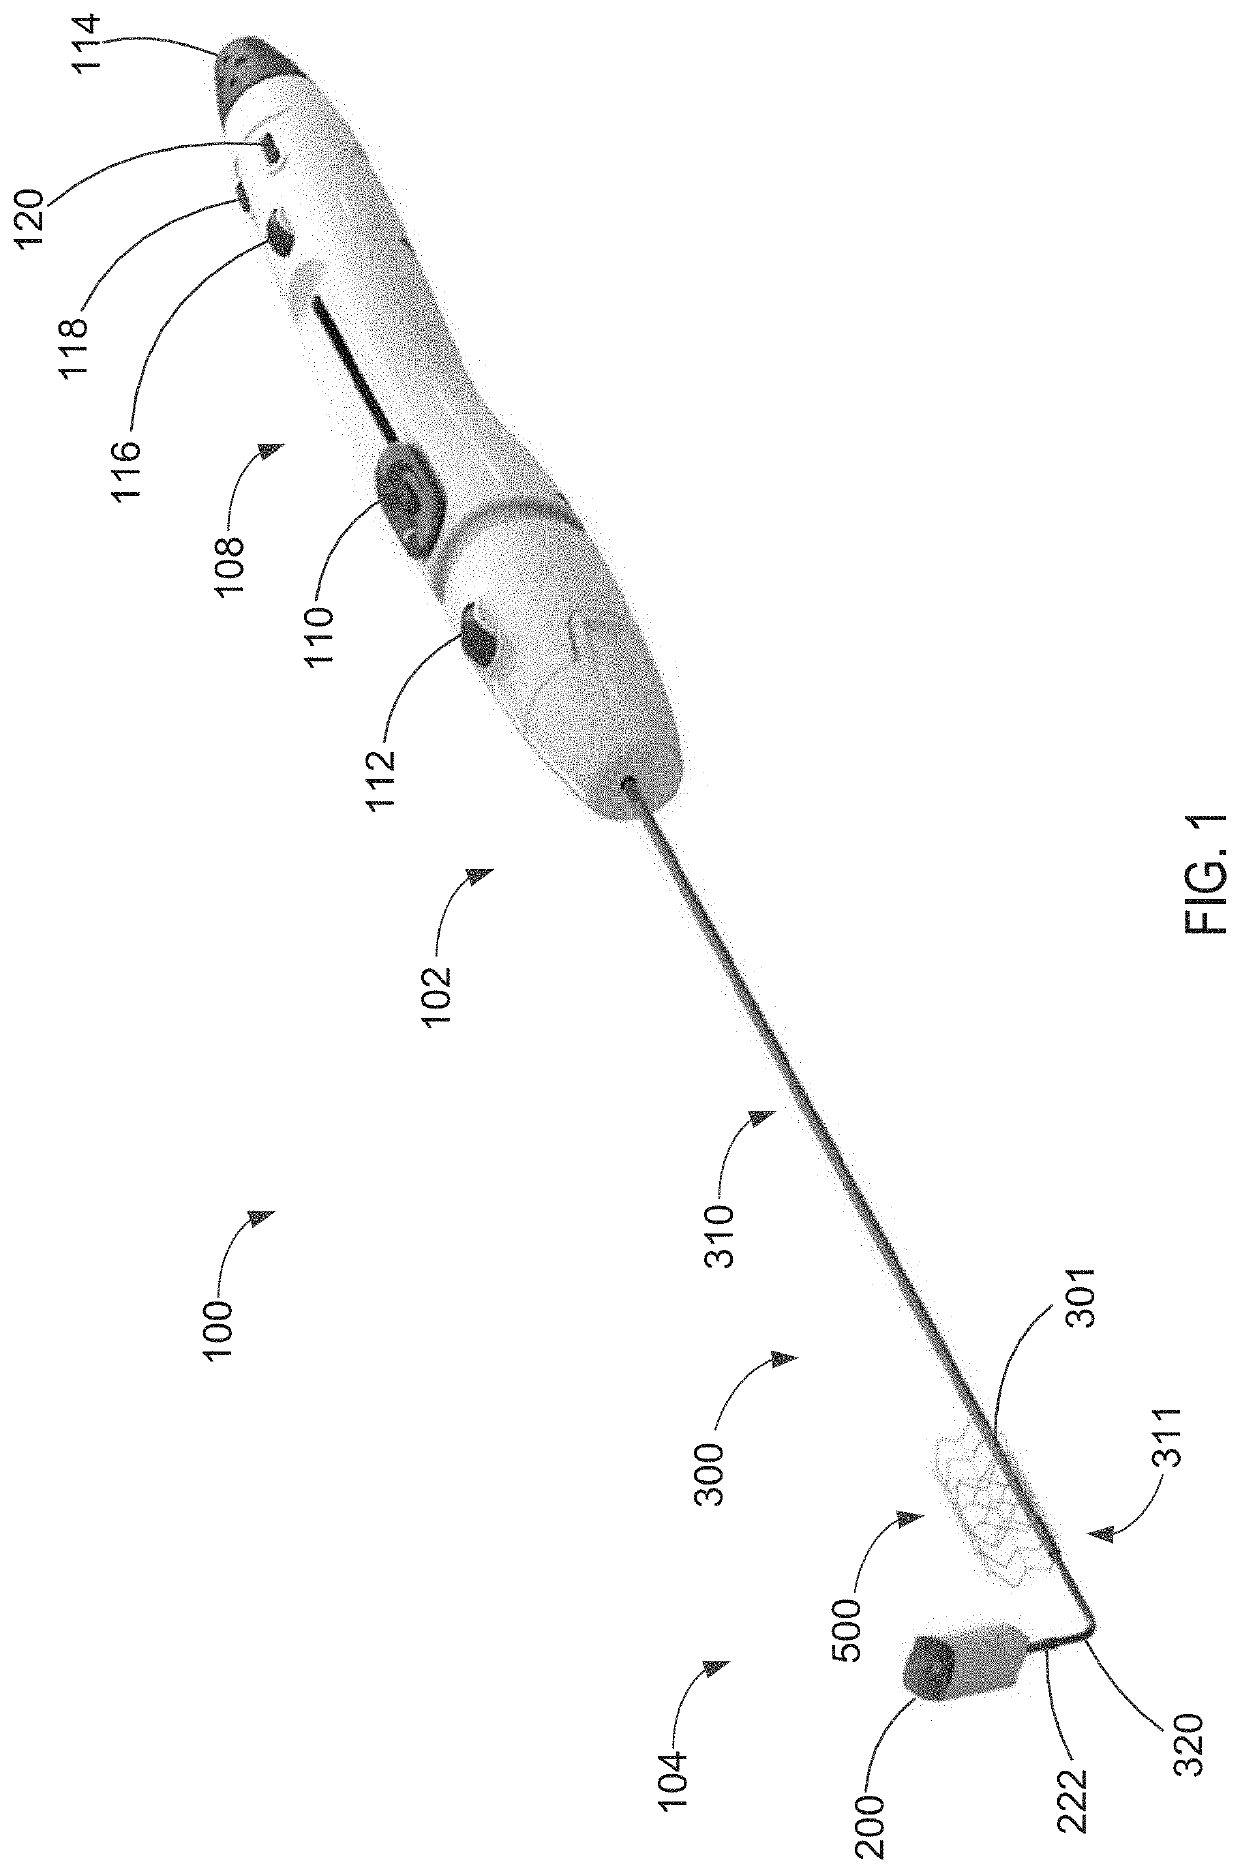 Apparatus and methods for treating a defective cardiac valve